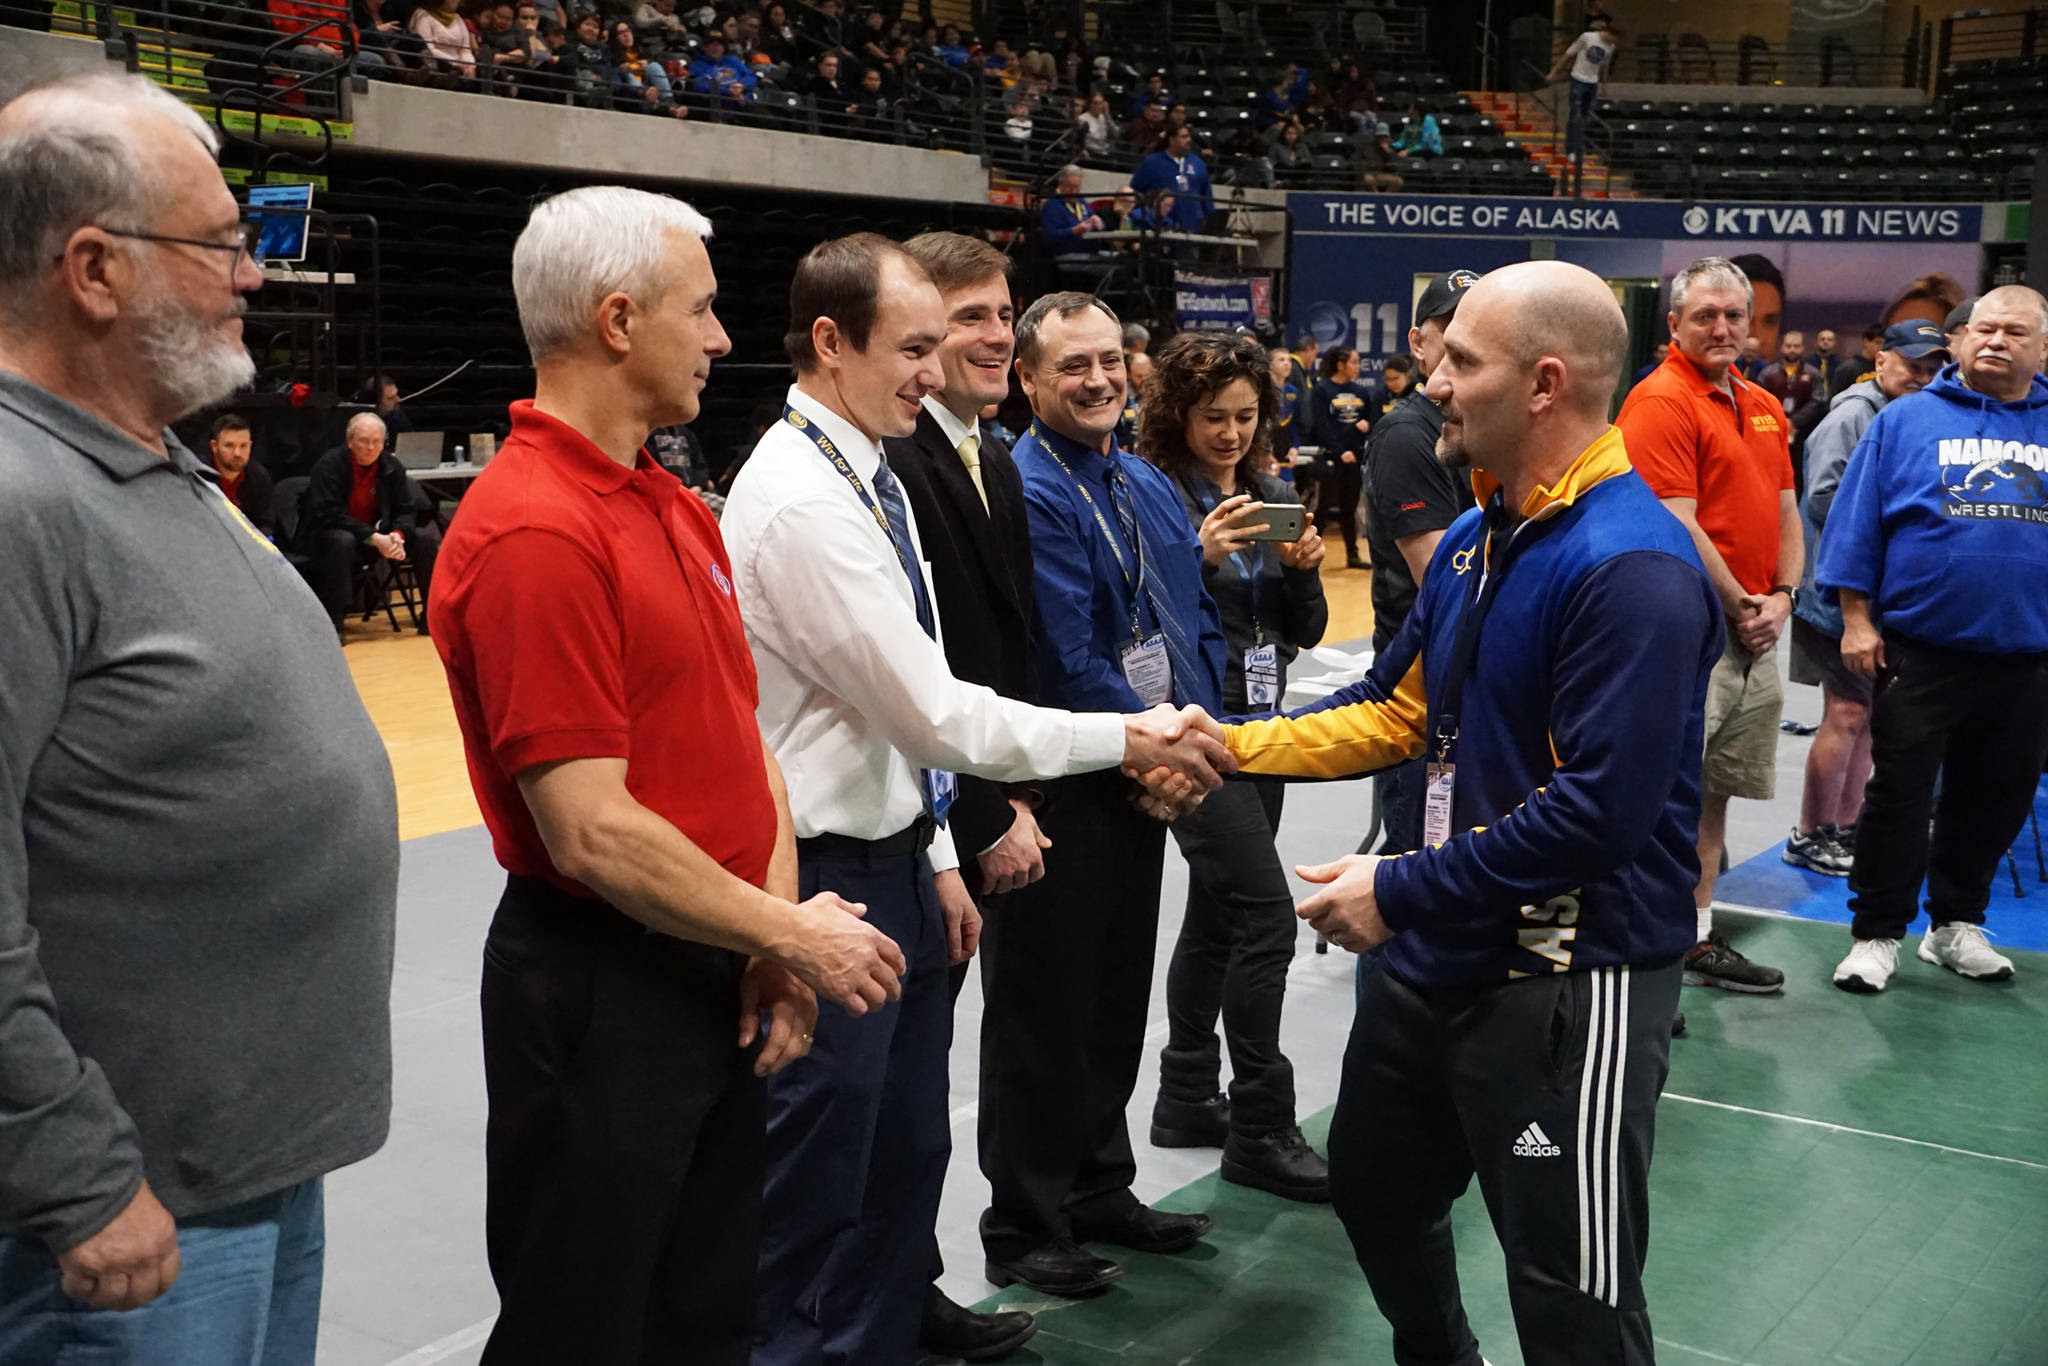 Homer High School Athletic Director Chis Perk, right in blue, is inducted into the Alaska Wrestling Hall of Fame on Dec. 15, 2018 at the Alaska Airlines Center in Anchorage, Alaska. (Photo courtesy Alaska Schools Activity Association)